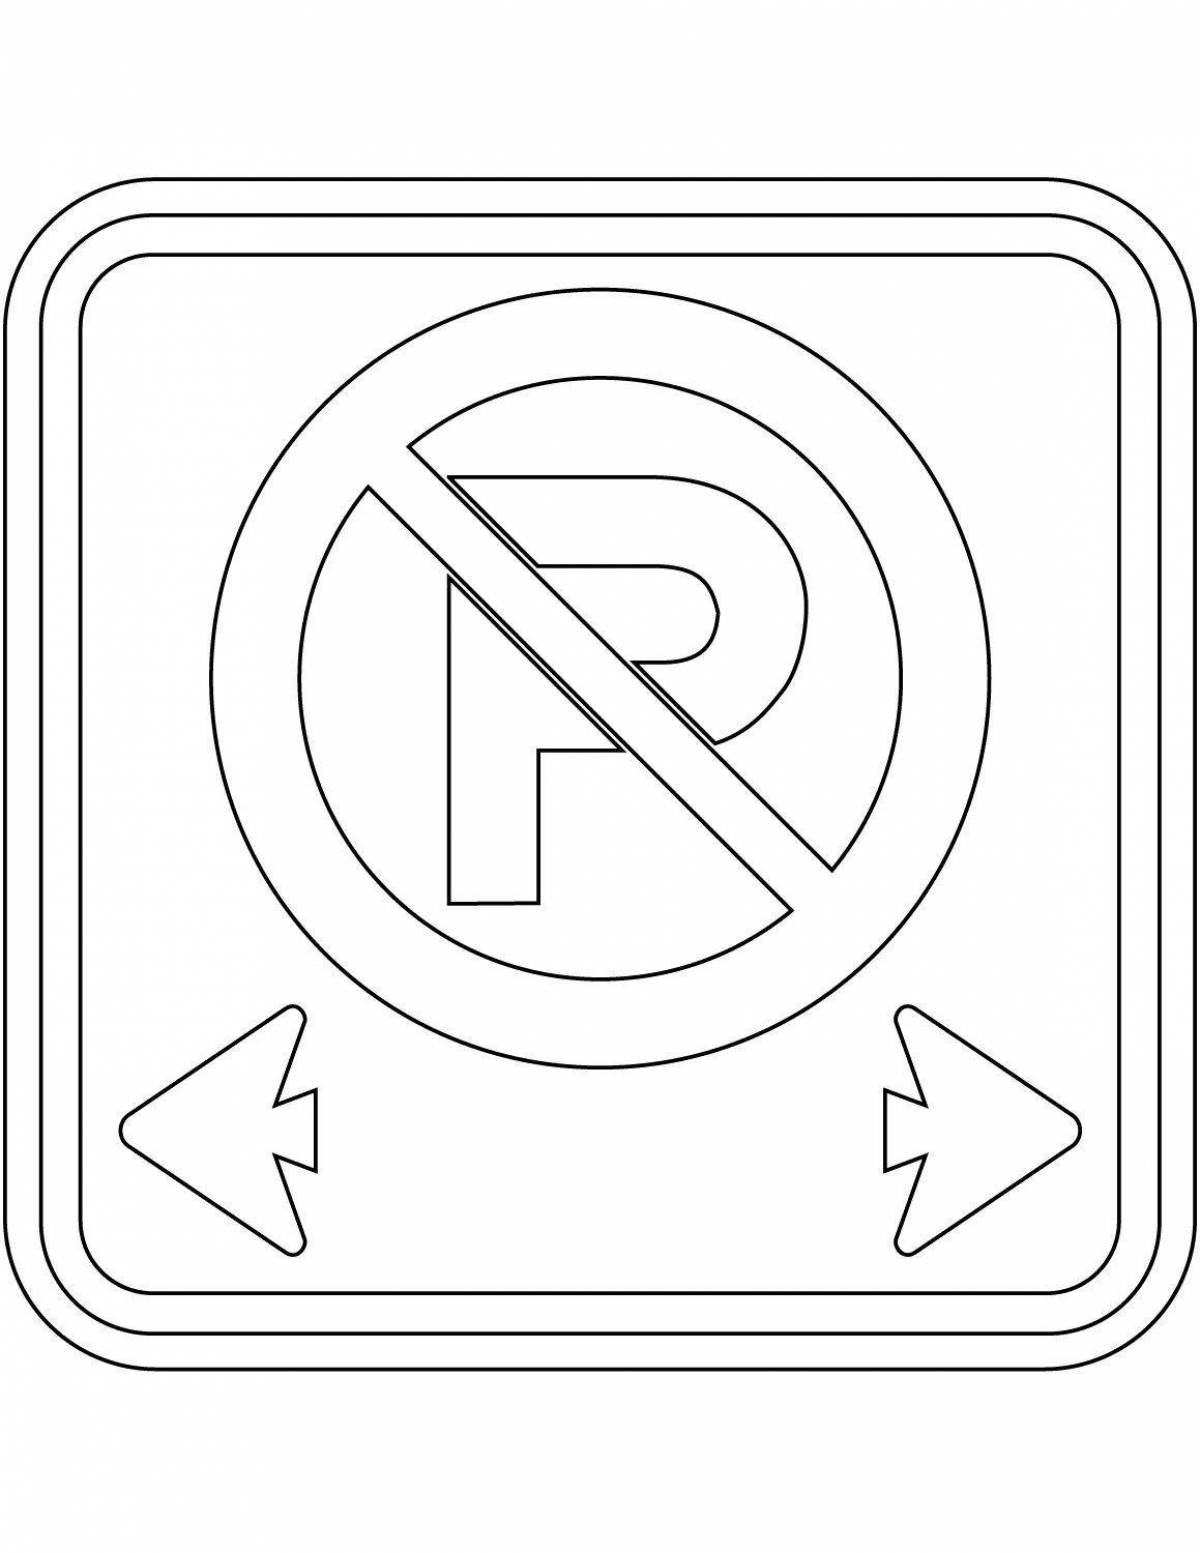 Coloring page magnetic parking sign